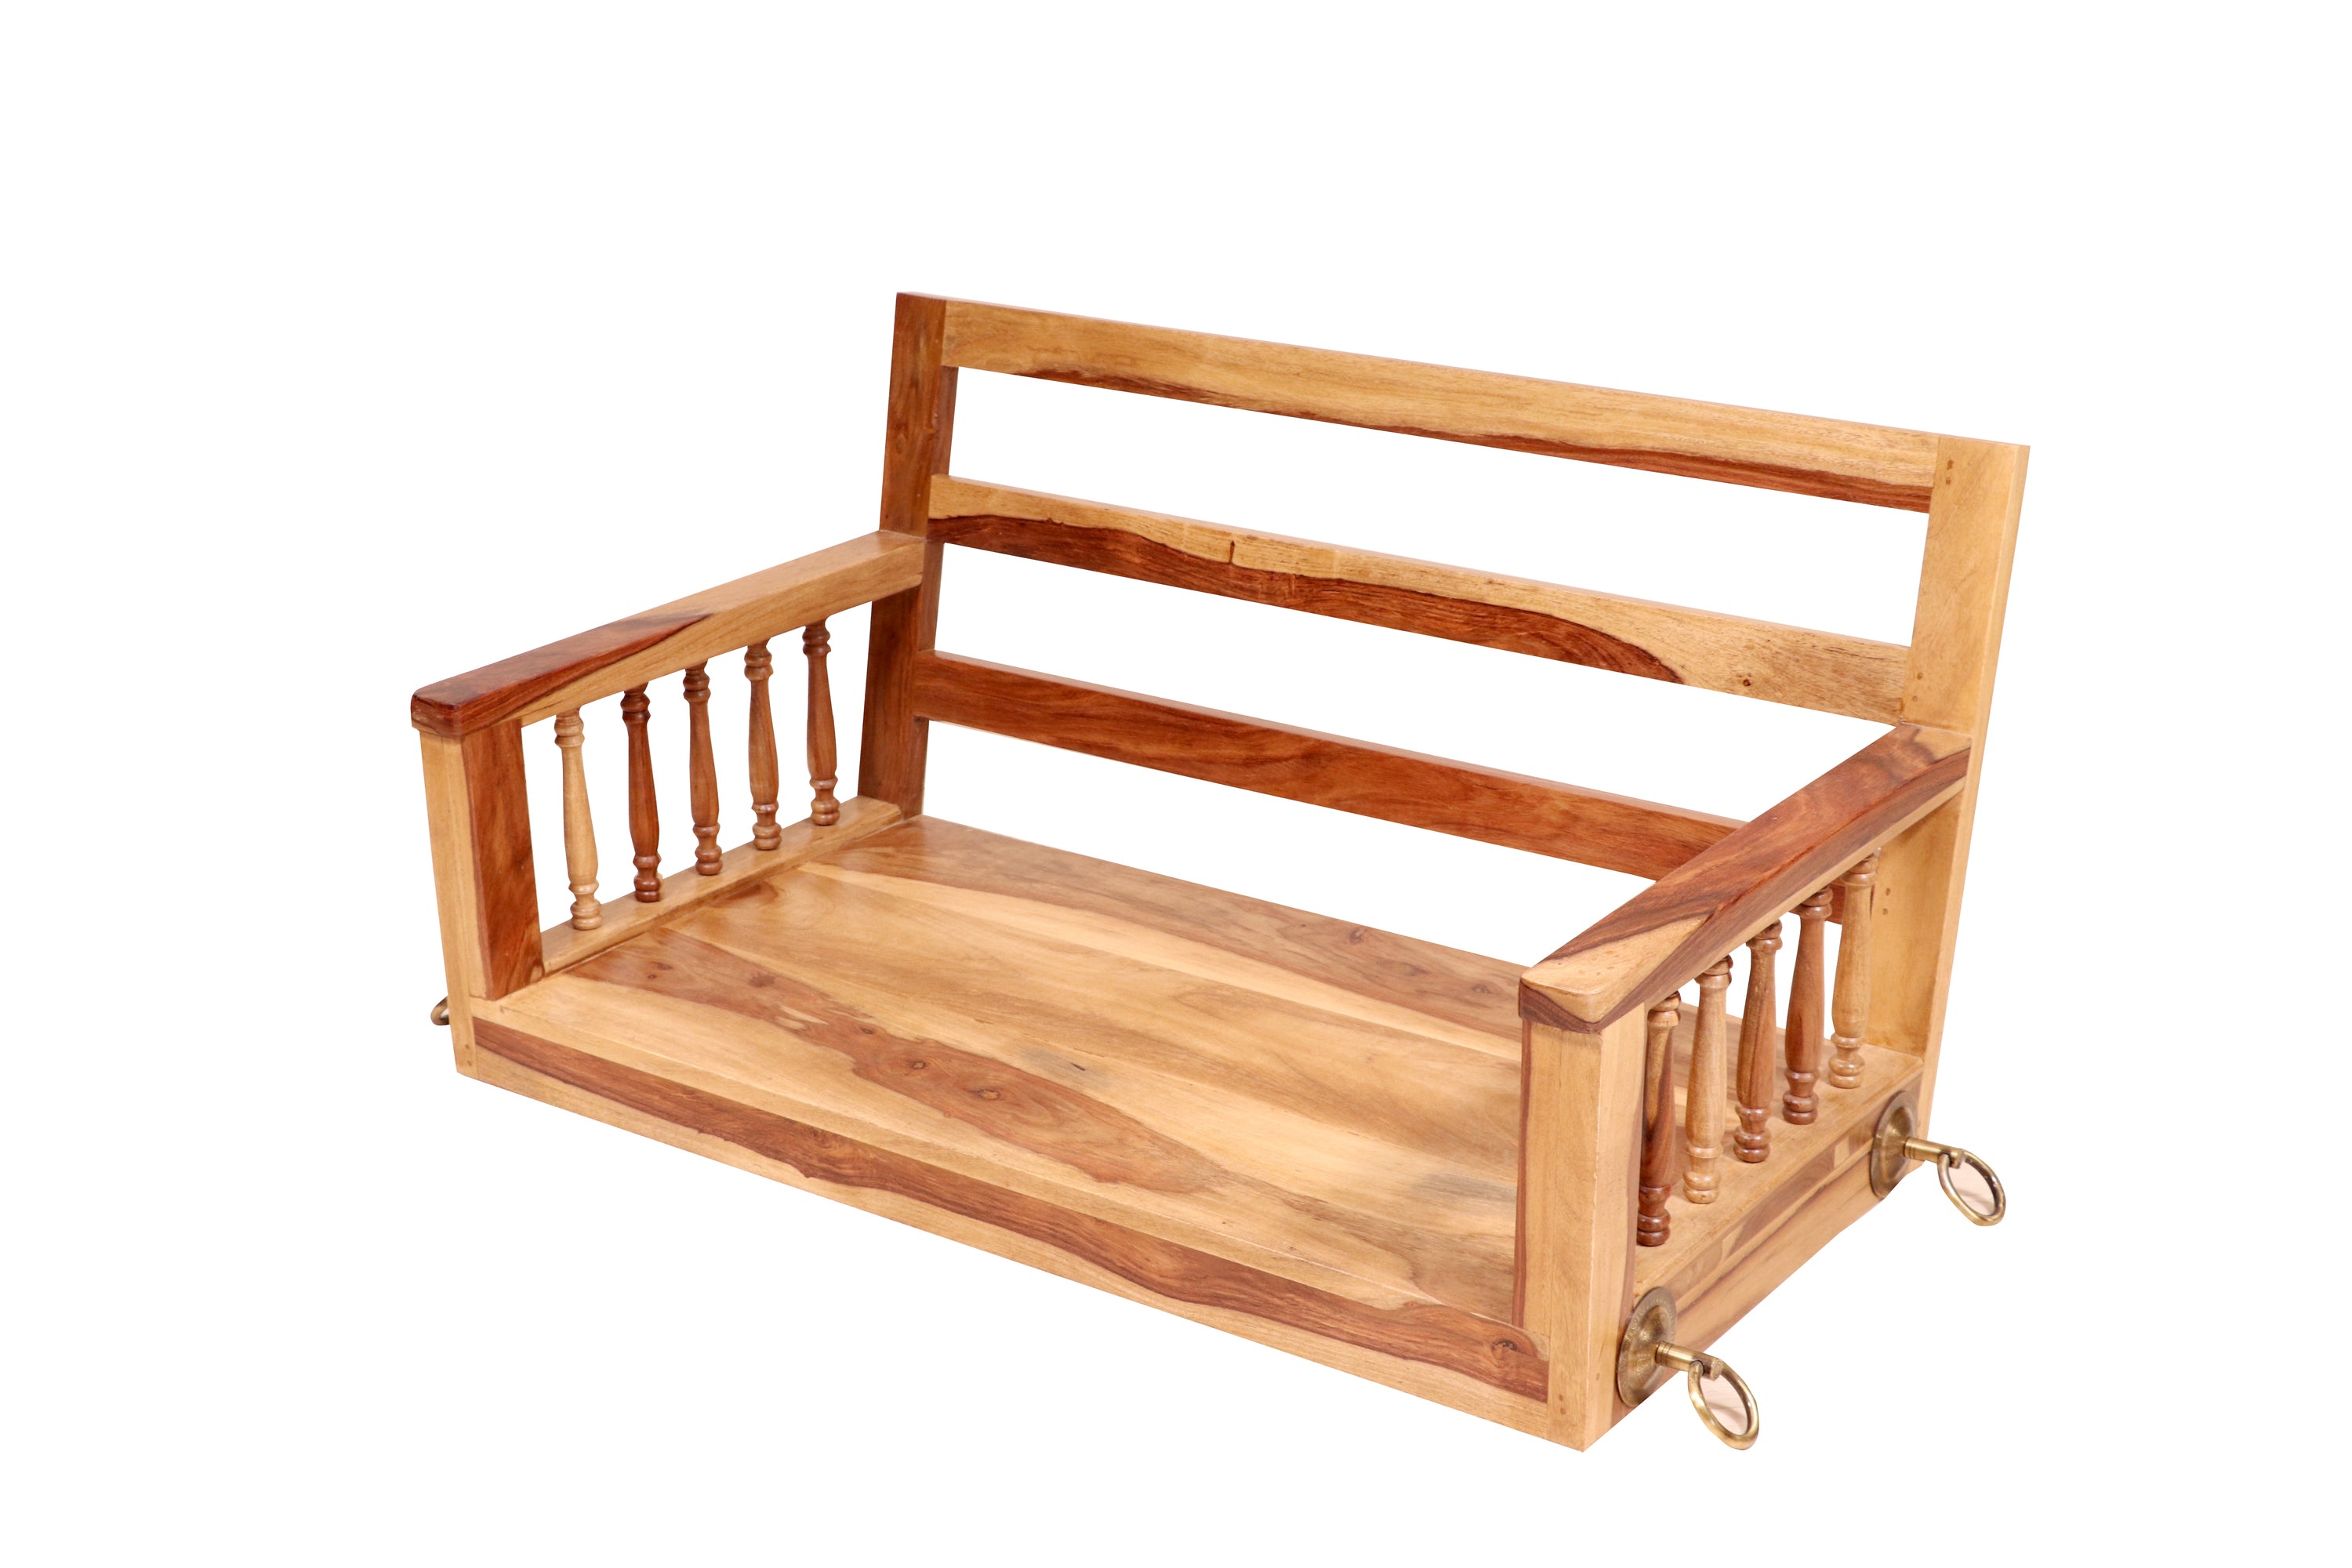 Seating bench concept Wooden Swing Swing